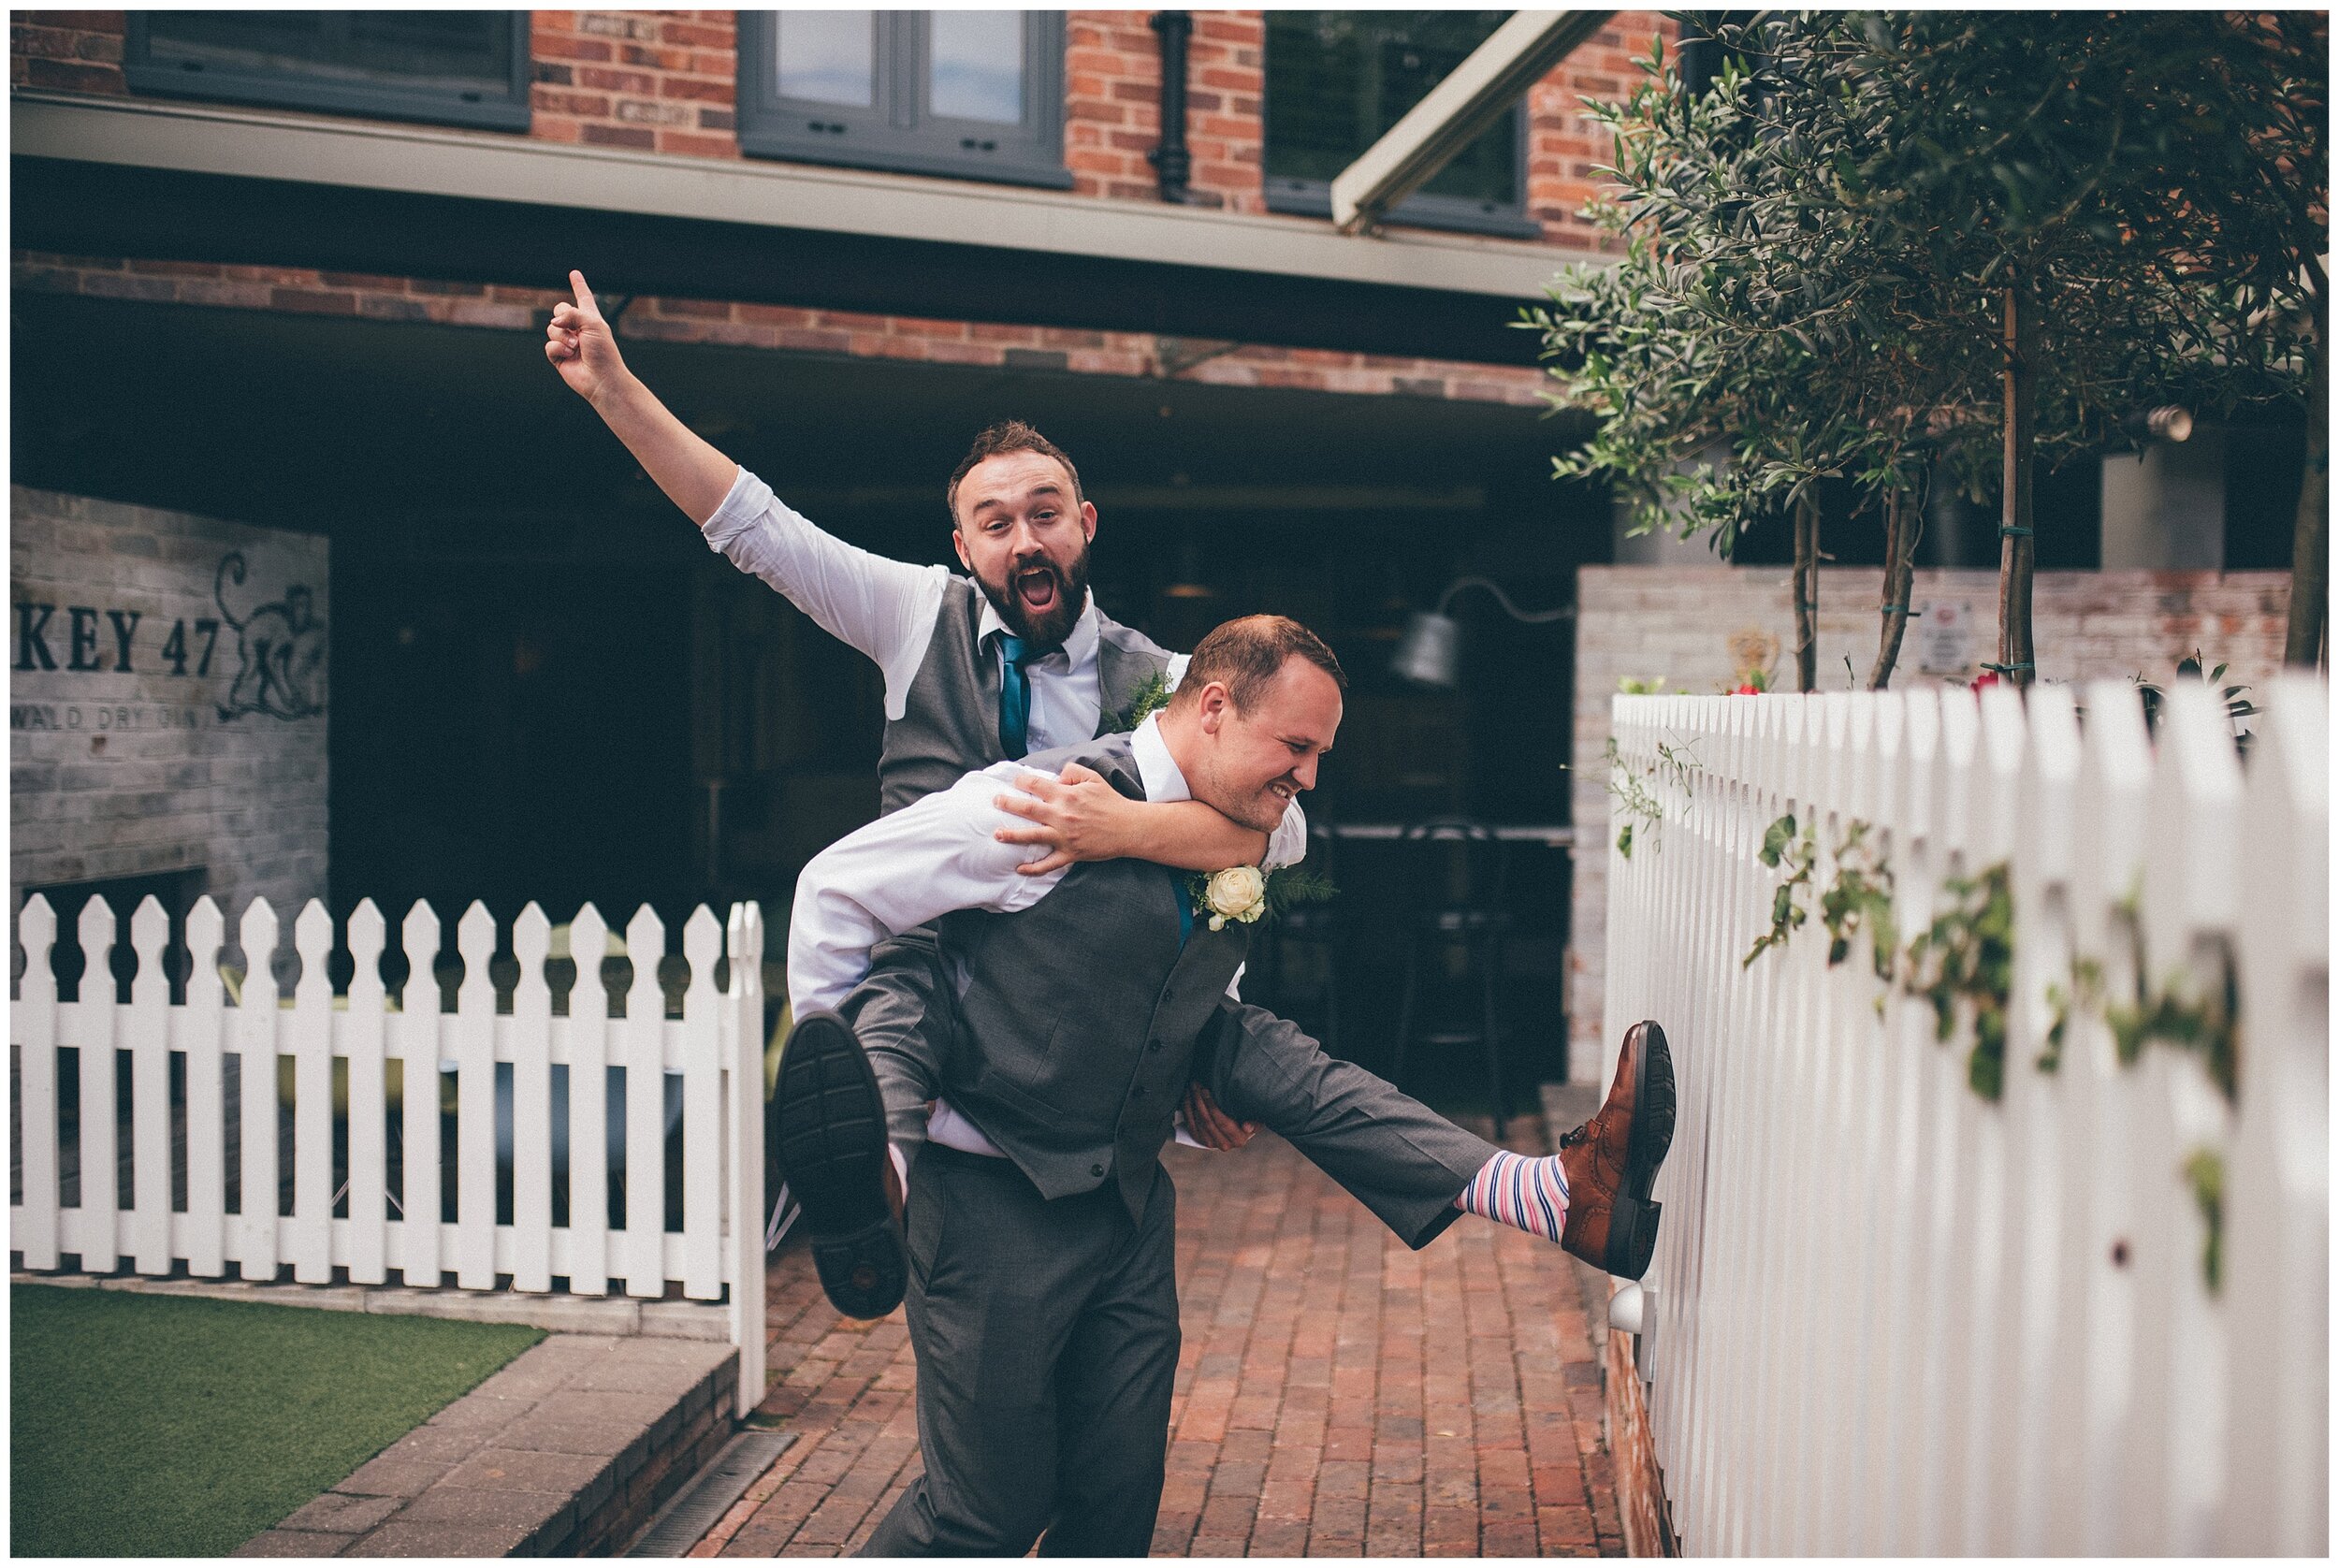 Best Man gives the groom a piggy back at Oddfellows in Chester.